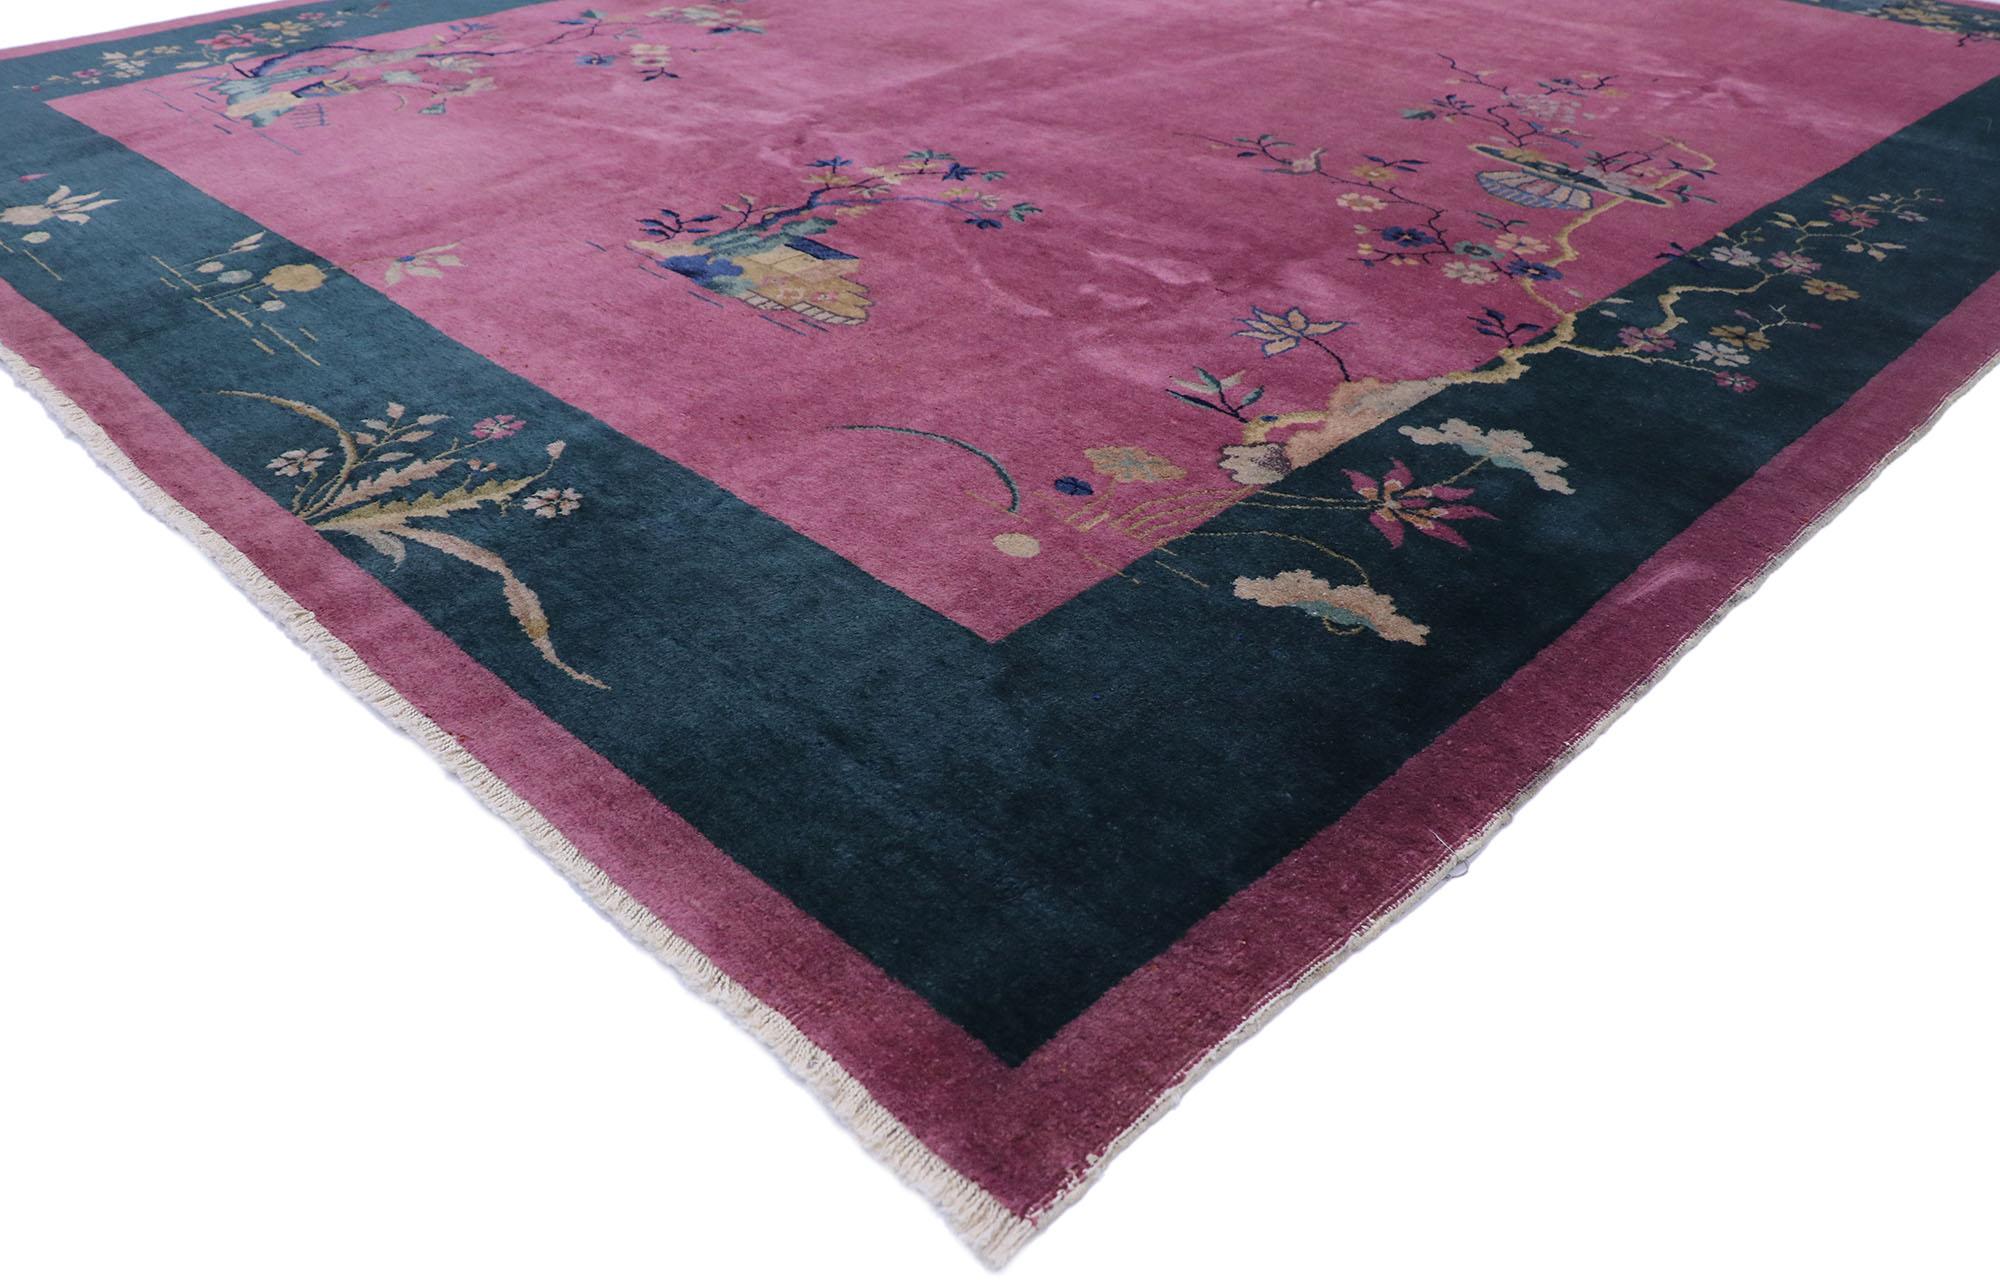 77629 Antique Chinese Art Deco Rug Inspired by Walter Nichols 09'00 x 11'09. This hand knotted wool antique Chinese Art Deco rug features a color-blocked field and border scheme festooned with large, glorious sprays of flowers. Lotuses, peonies,